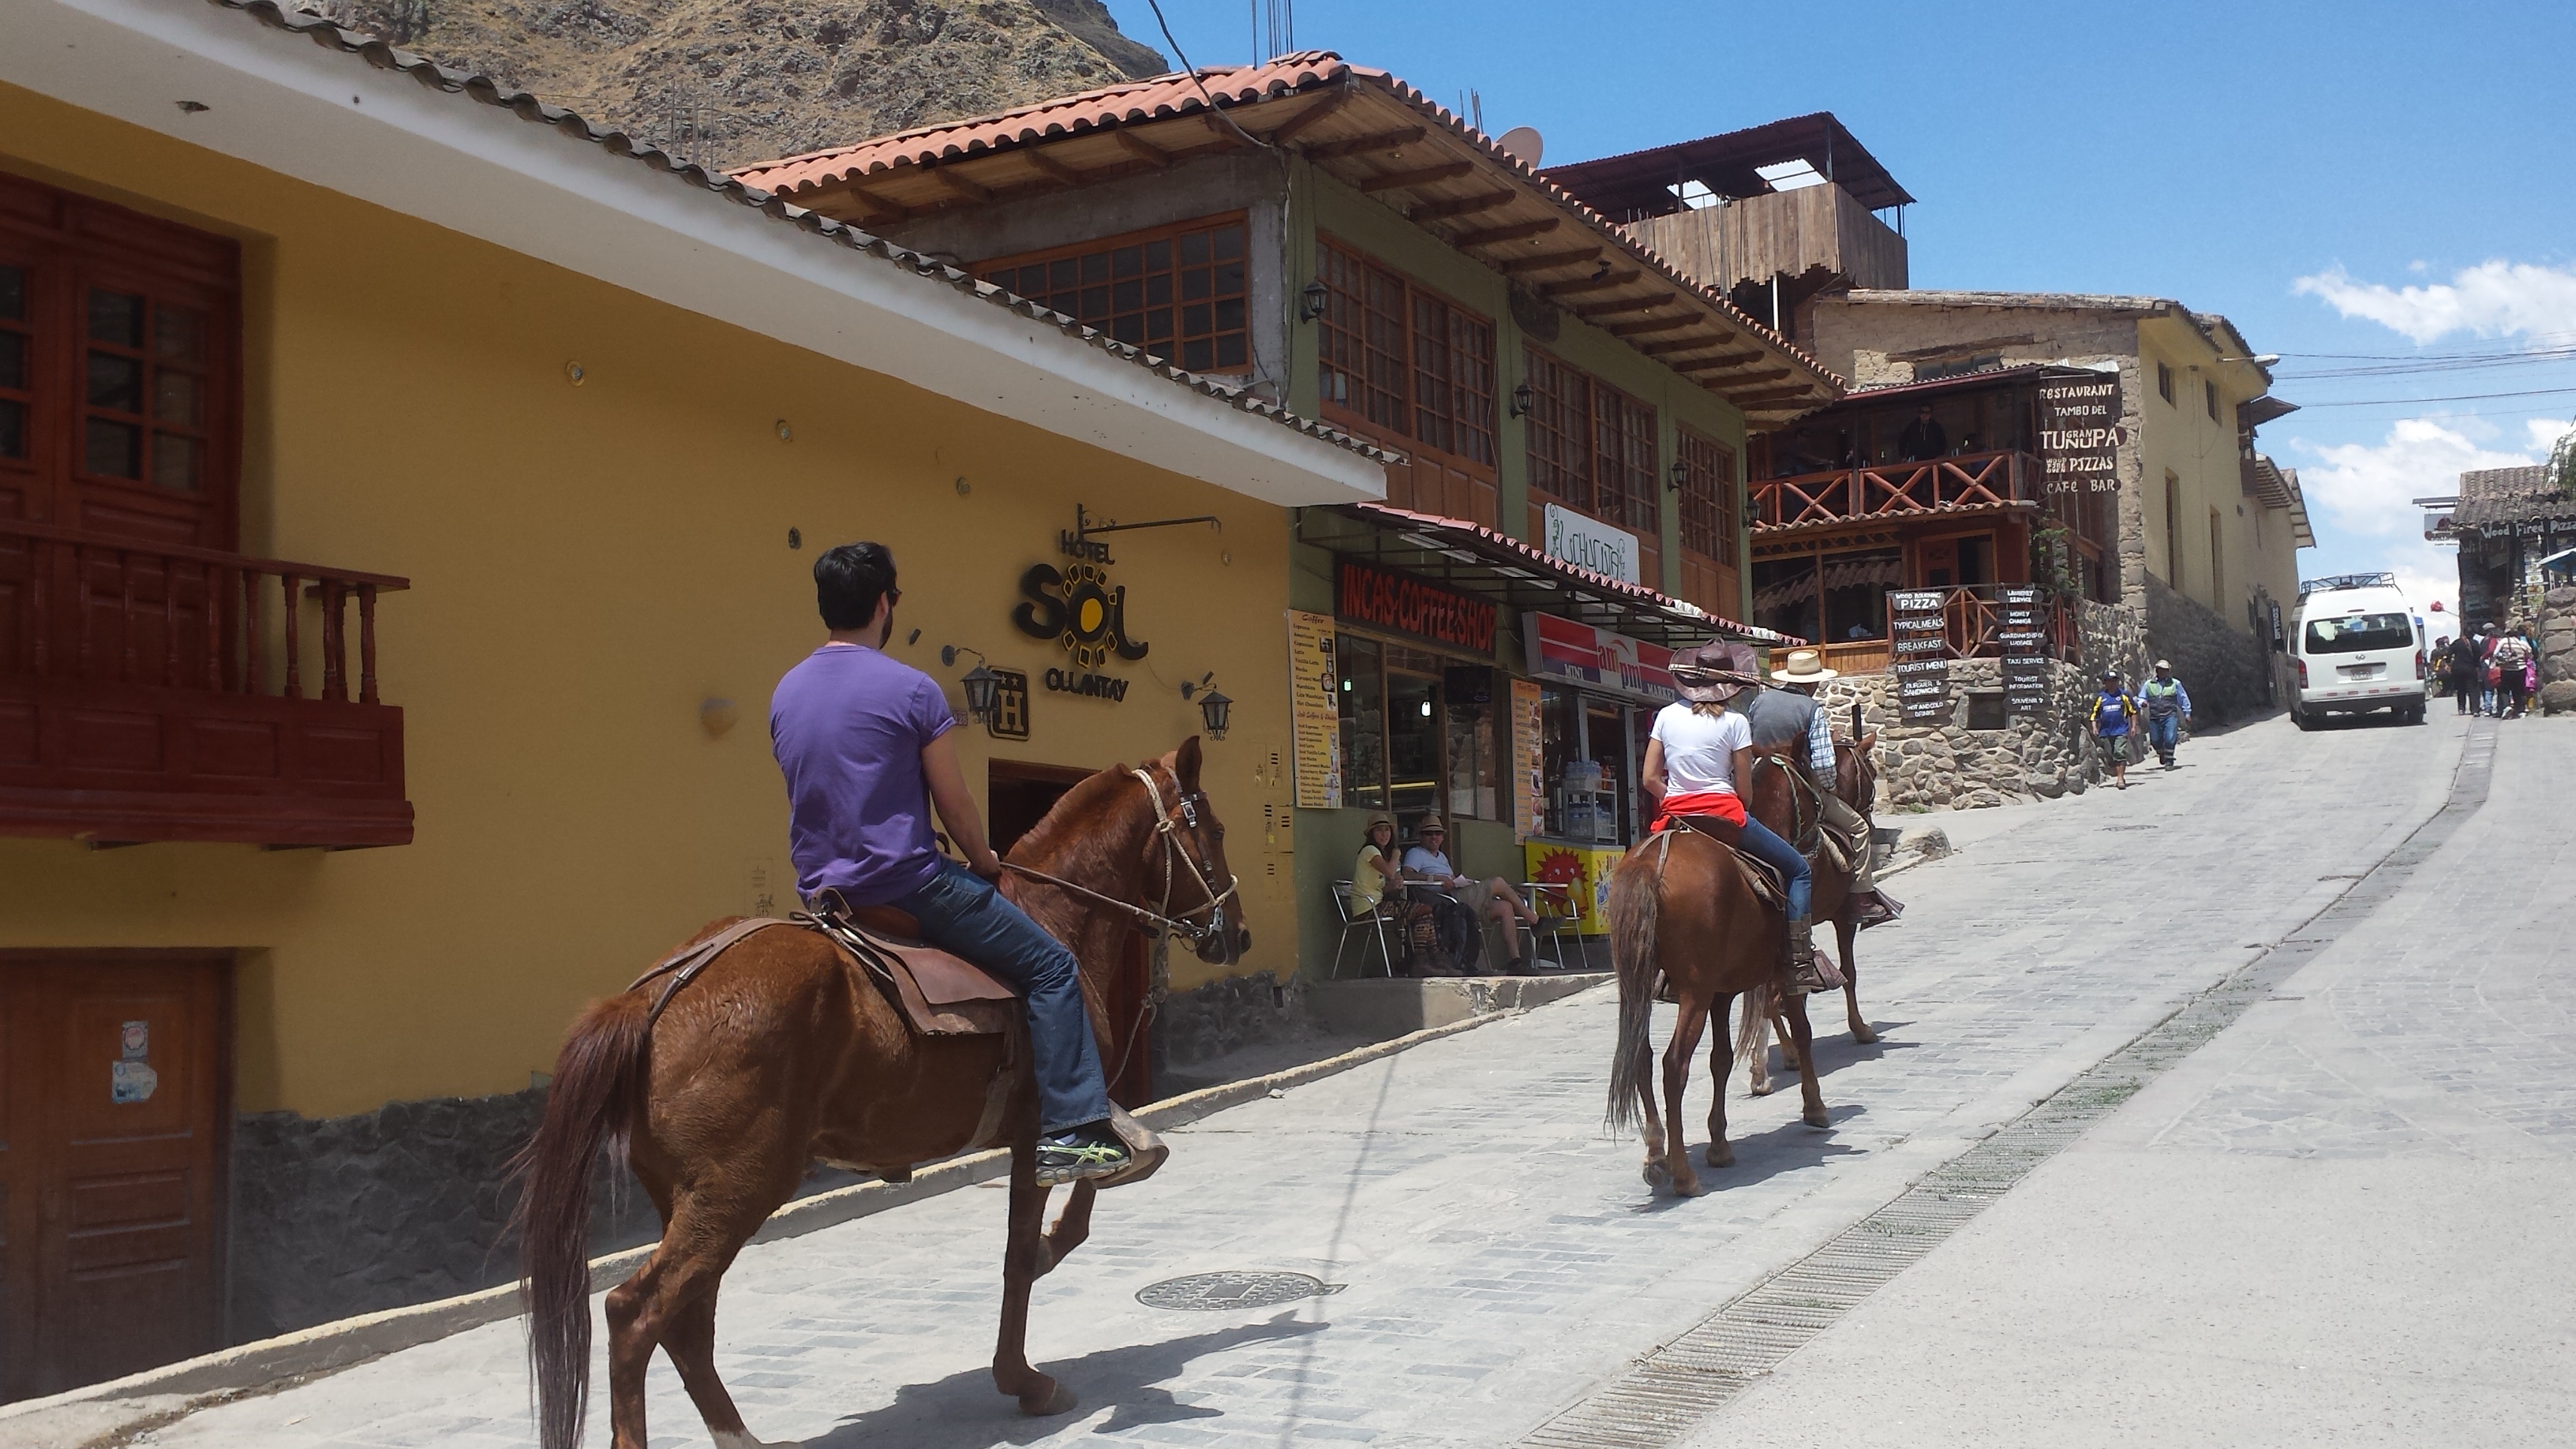 Day 2 - Arrival in Cusco and transfer to Ollantaytambo